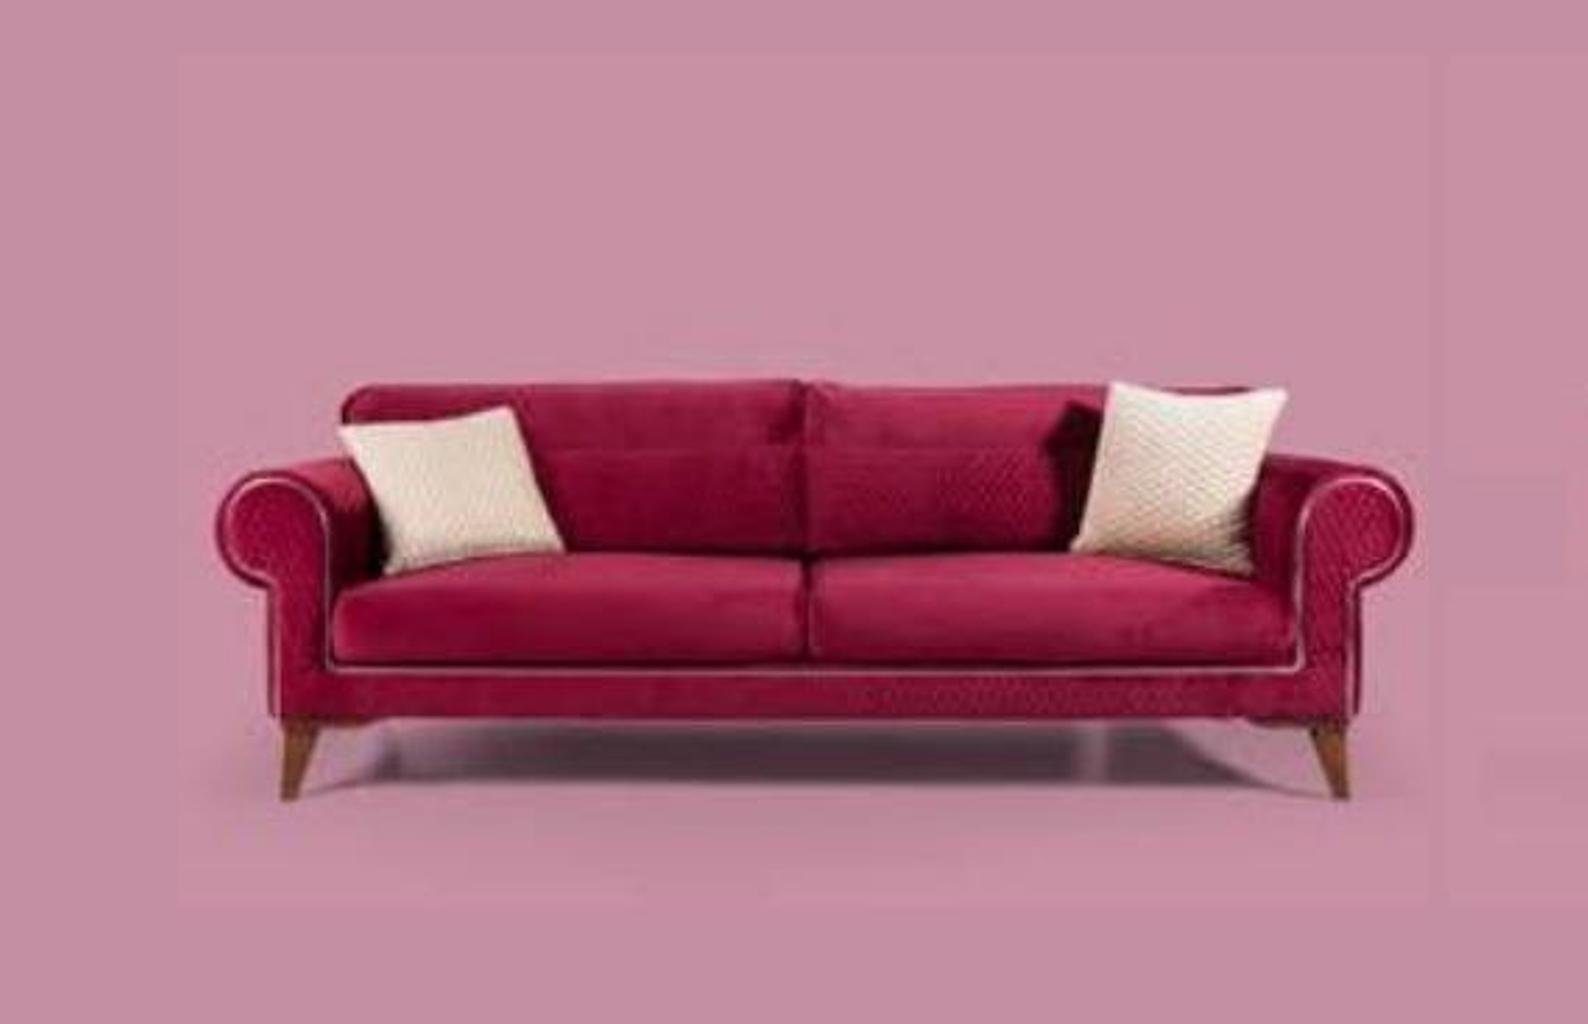 Couch in Sitz Textil Rotes Sofa 3 Sofa JVmoebel Sofas Polster Luxus Made Möbel, Europe